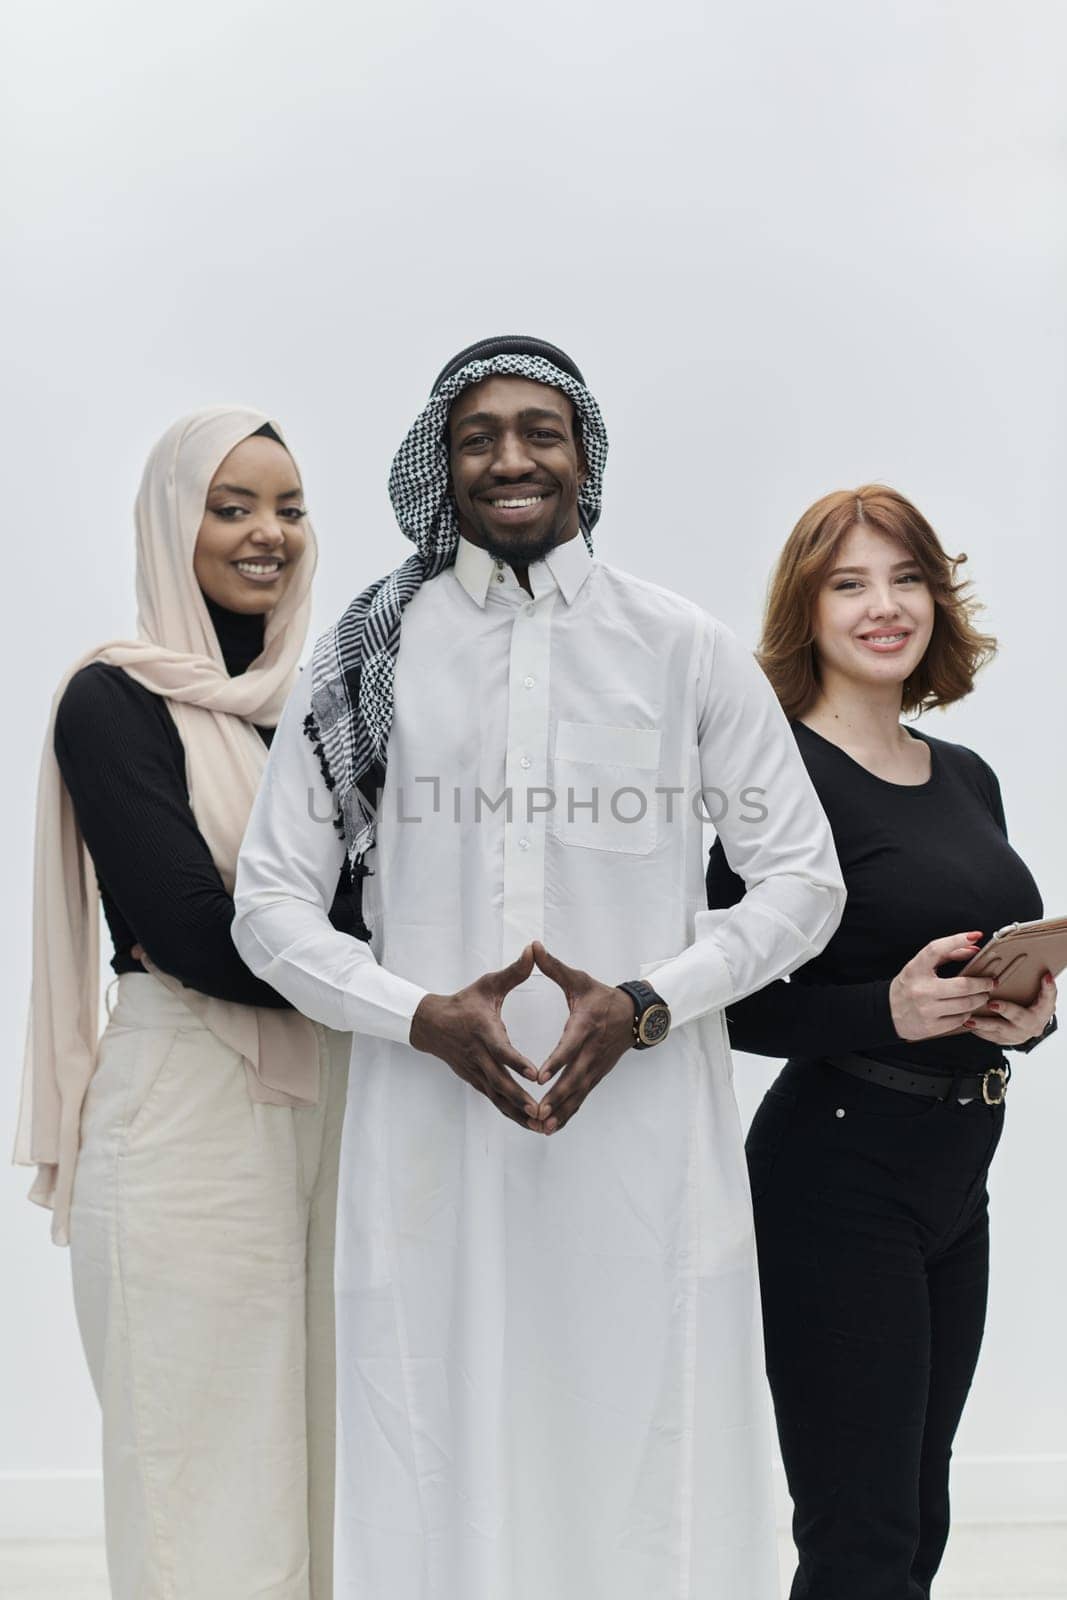 Arabic businessman stands confidently alongside two businesswomen, portraying a poised and diverse team that embodies ambition, innovation, and visionary leadership against a pristine white background by dotshock